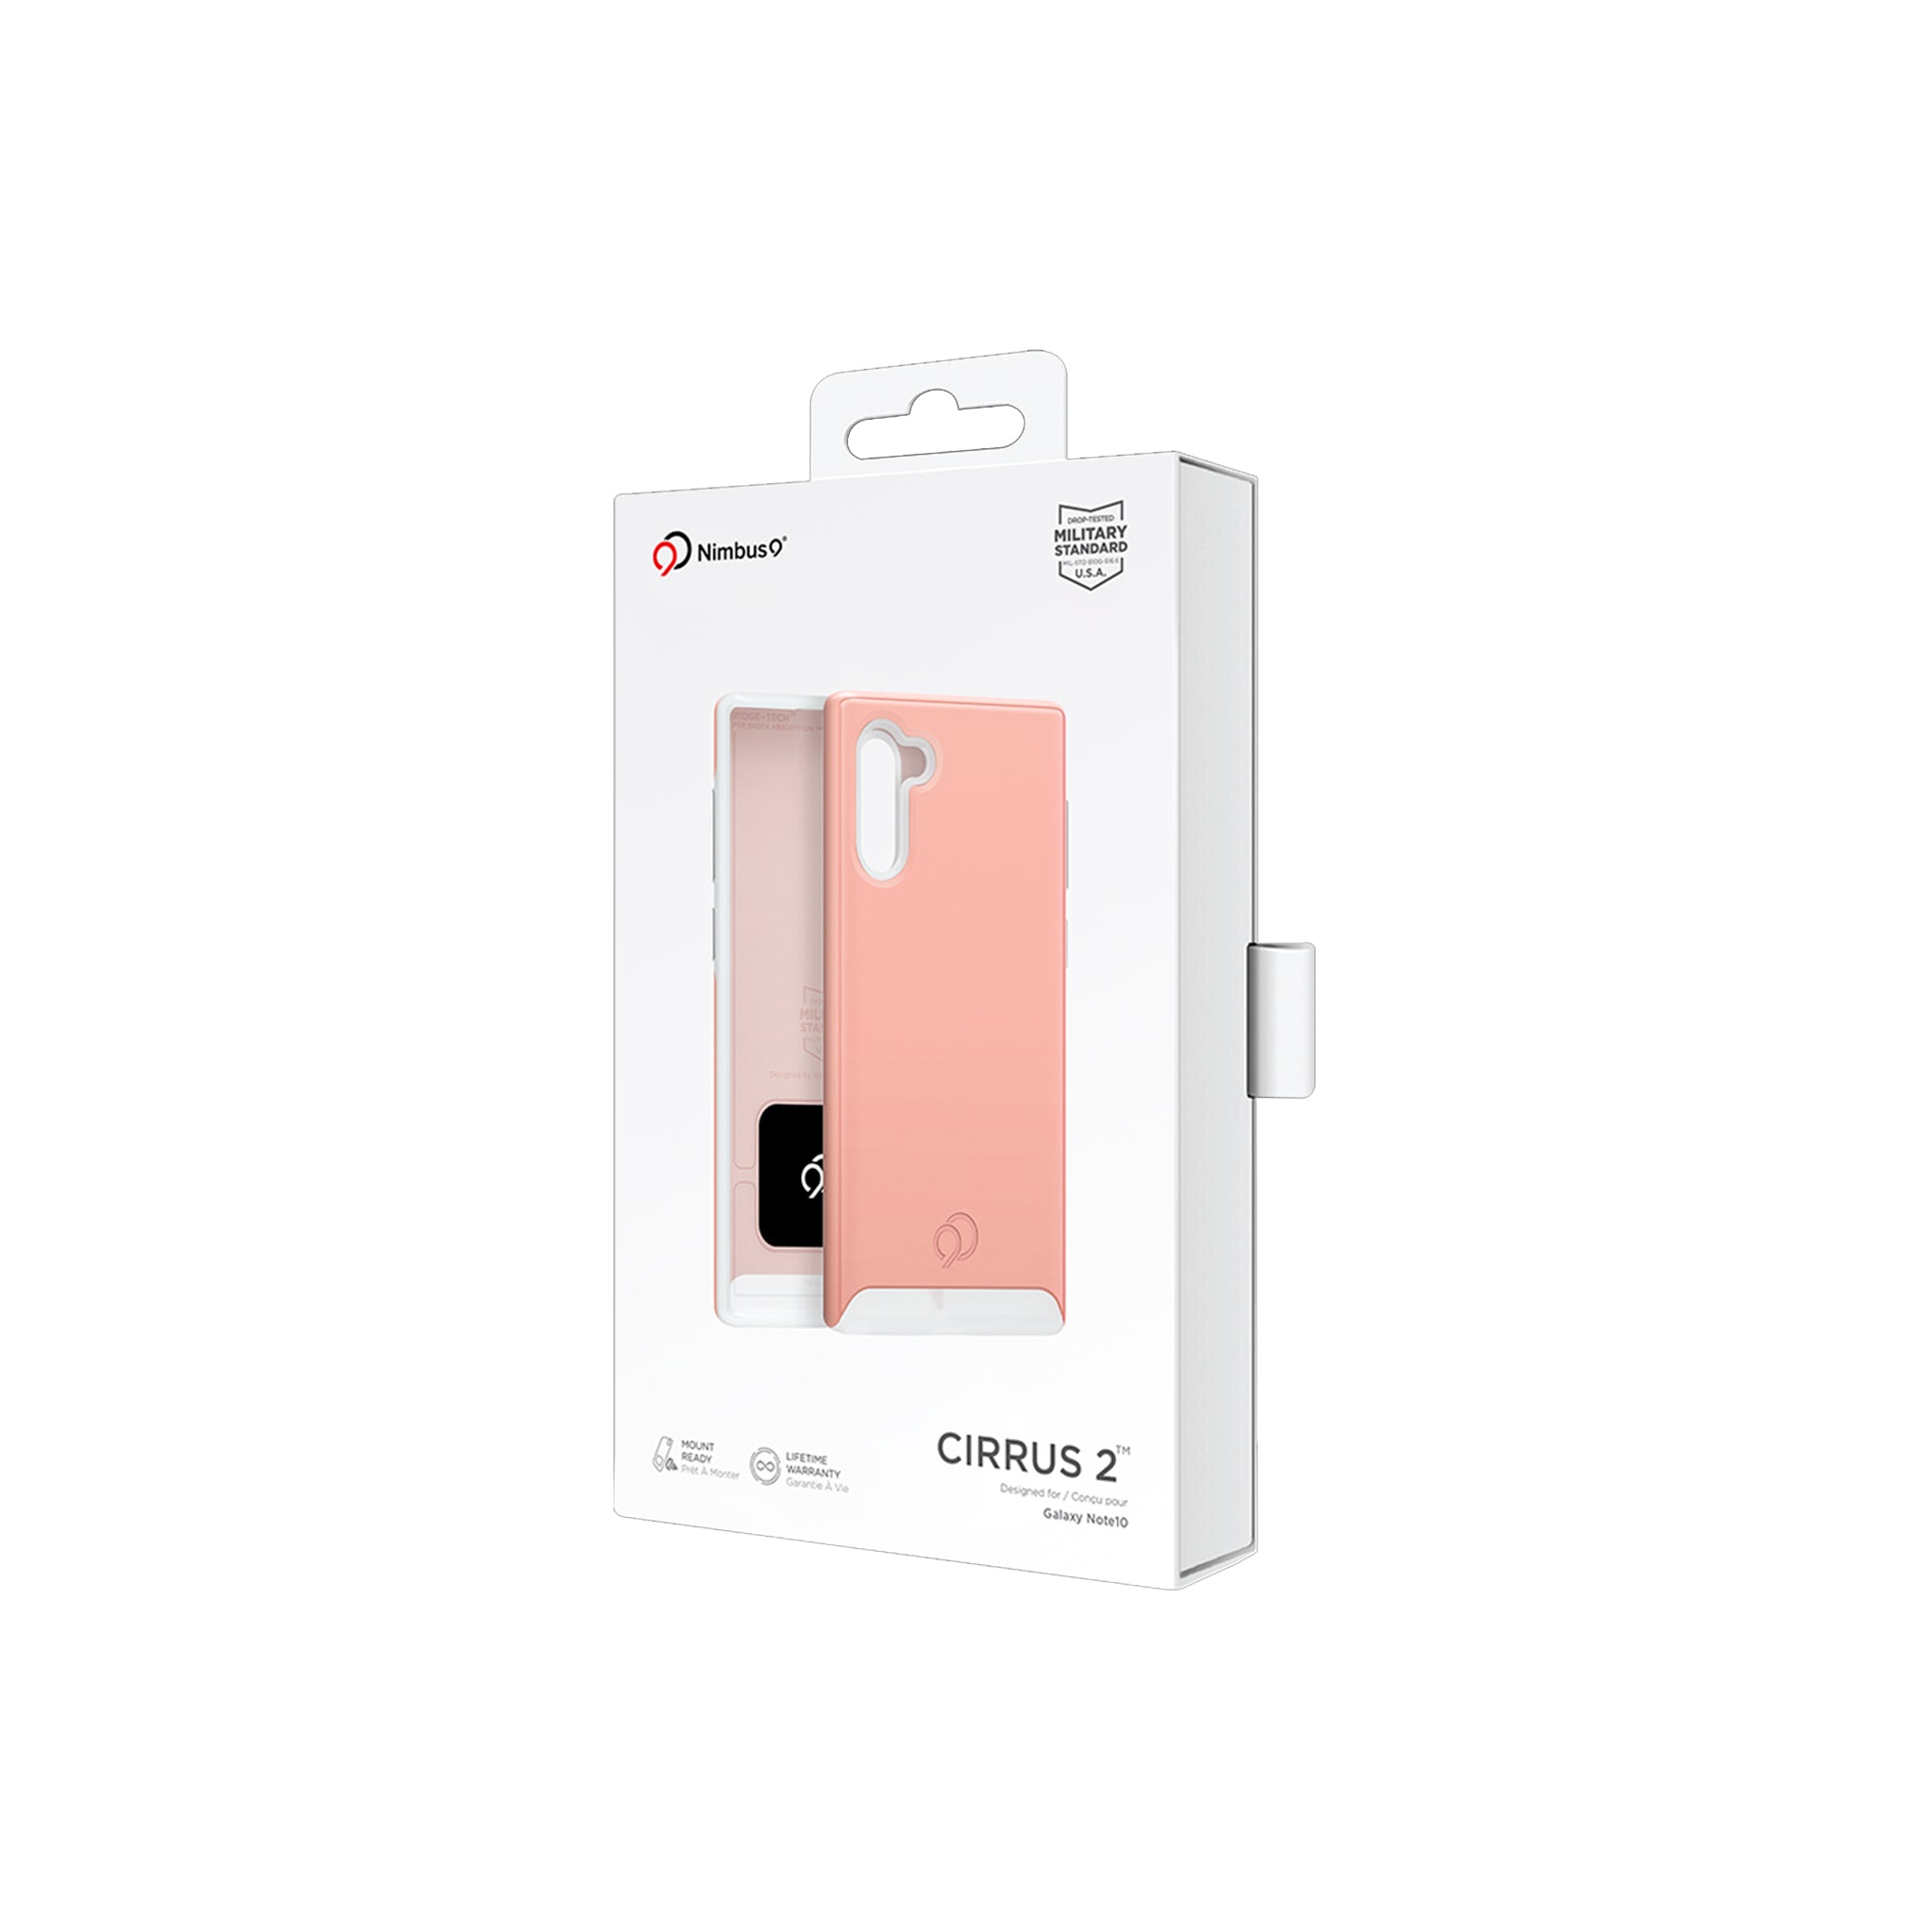 Nimbus9 - Cirrus 2 Case For Samsung Galaxy Note10 - Rose Clear